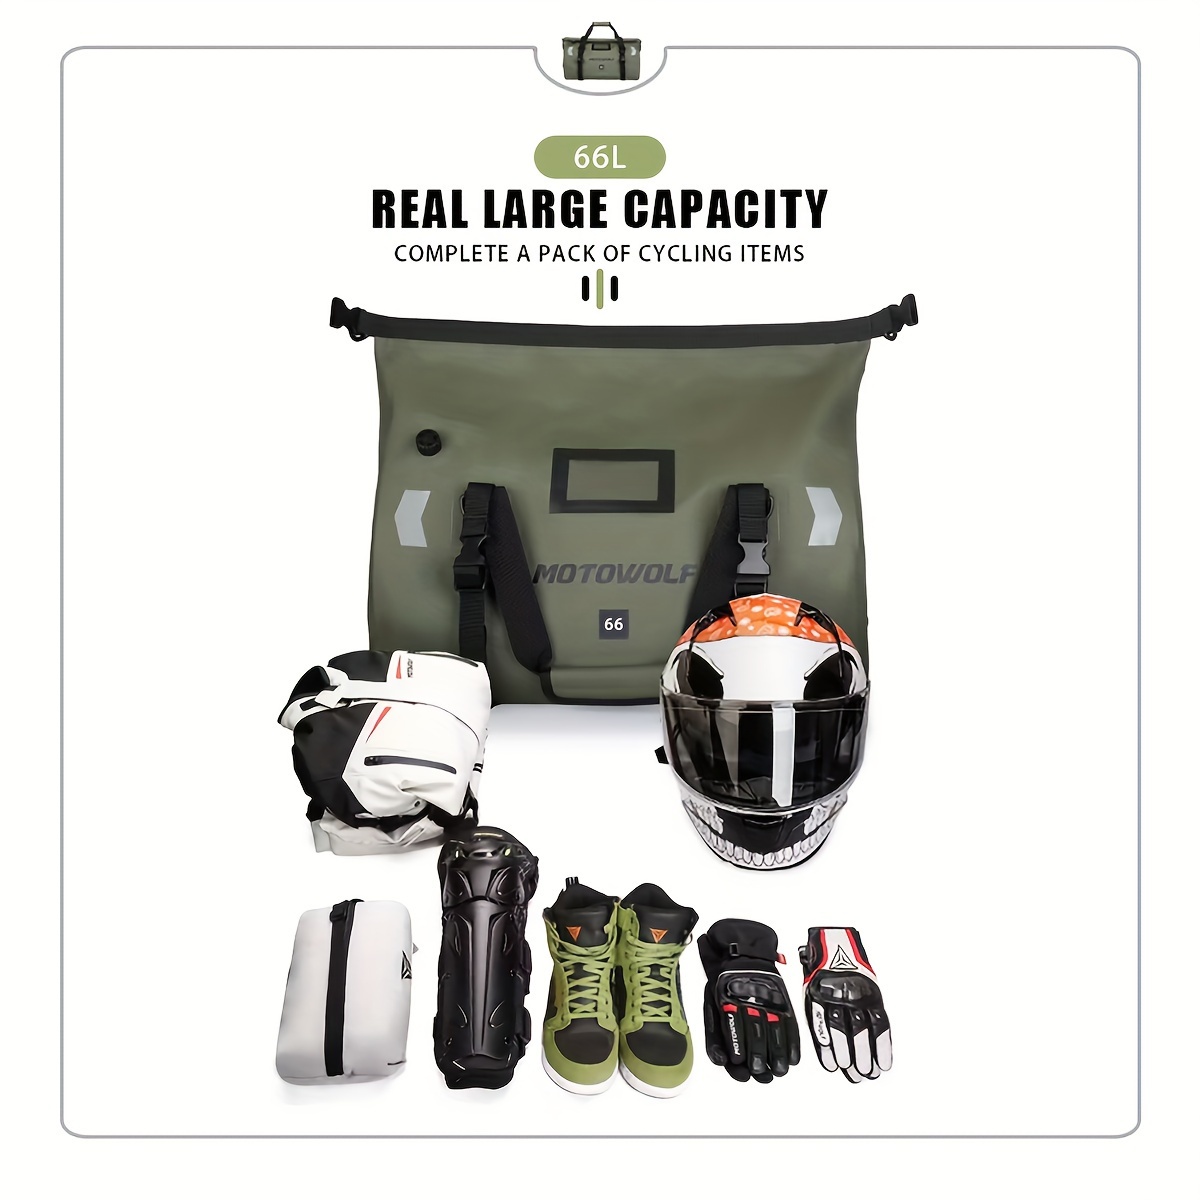  OXMART Motorcycle Dry Bag for Traveling Waterproof, PVC 500D  Zipper Closure Motorcycle Duffel Bag 80L Thickened Bottom Wet Dry  Separation Layer Reflective Strip for Fishing Hiking Boating Camping :  Sports 